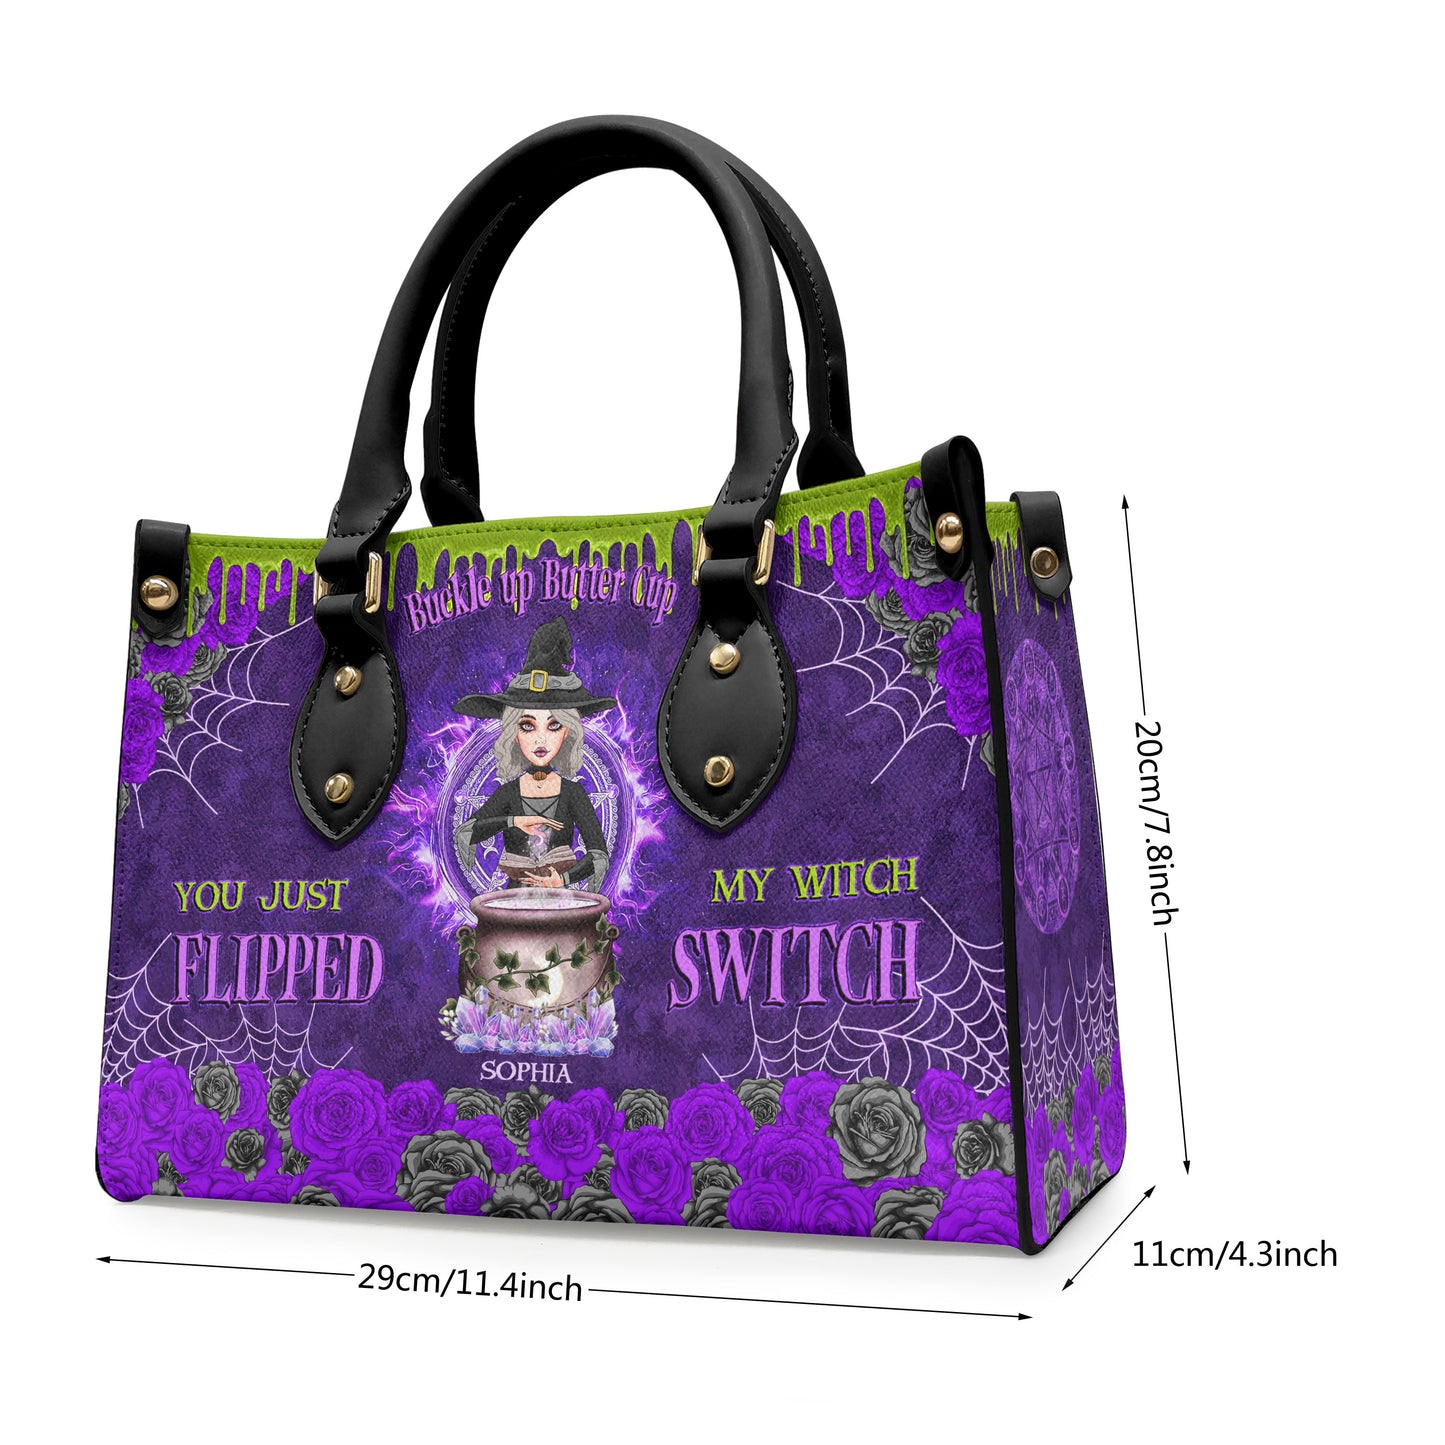 You Just Flipped My Witch Switch - Personalized Leather Bag - Halloween, Funny, Birthday Gift For Witches, Witch Craft, Best Friends, Coven Sisters